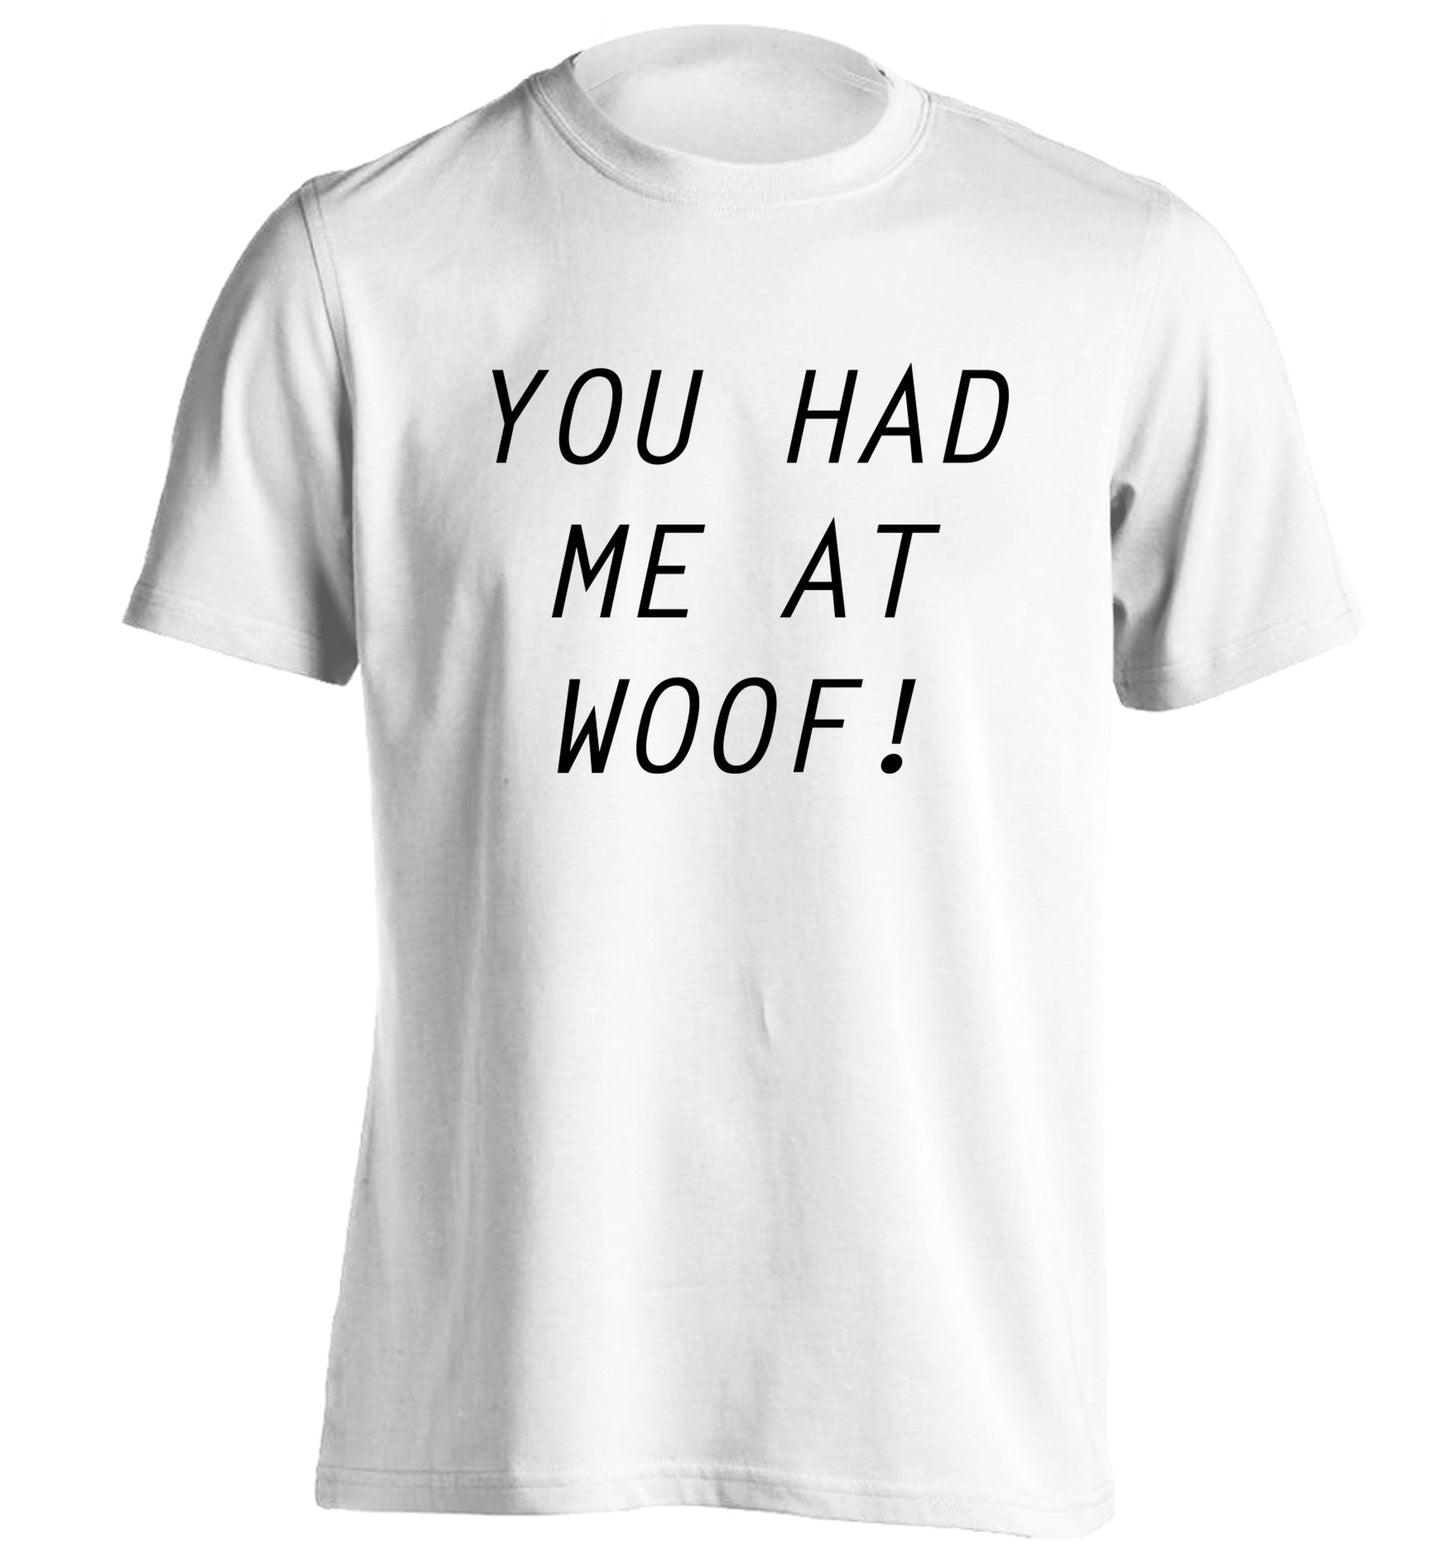 You had me at woof adults unisex white Tshirt 2XL